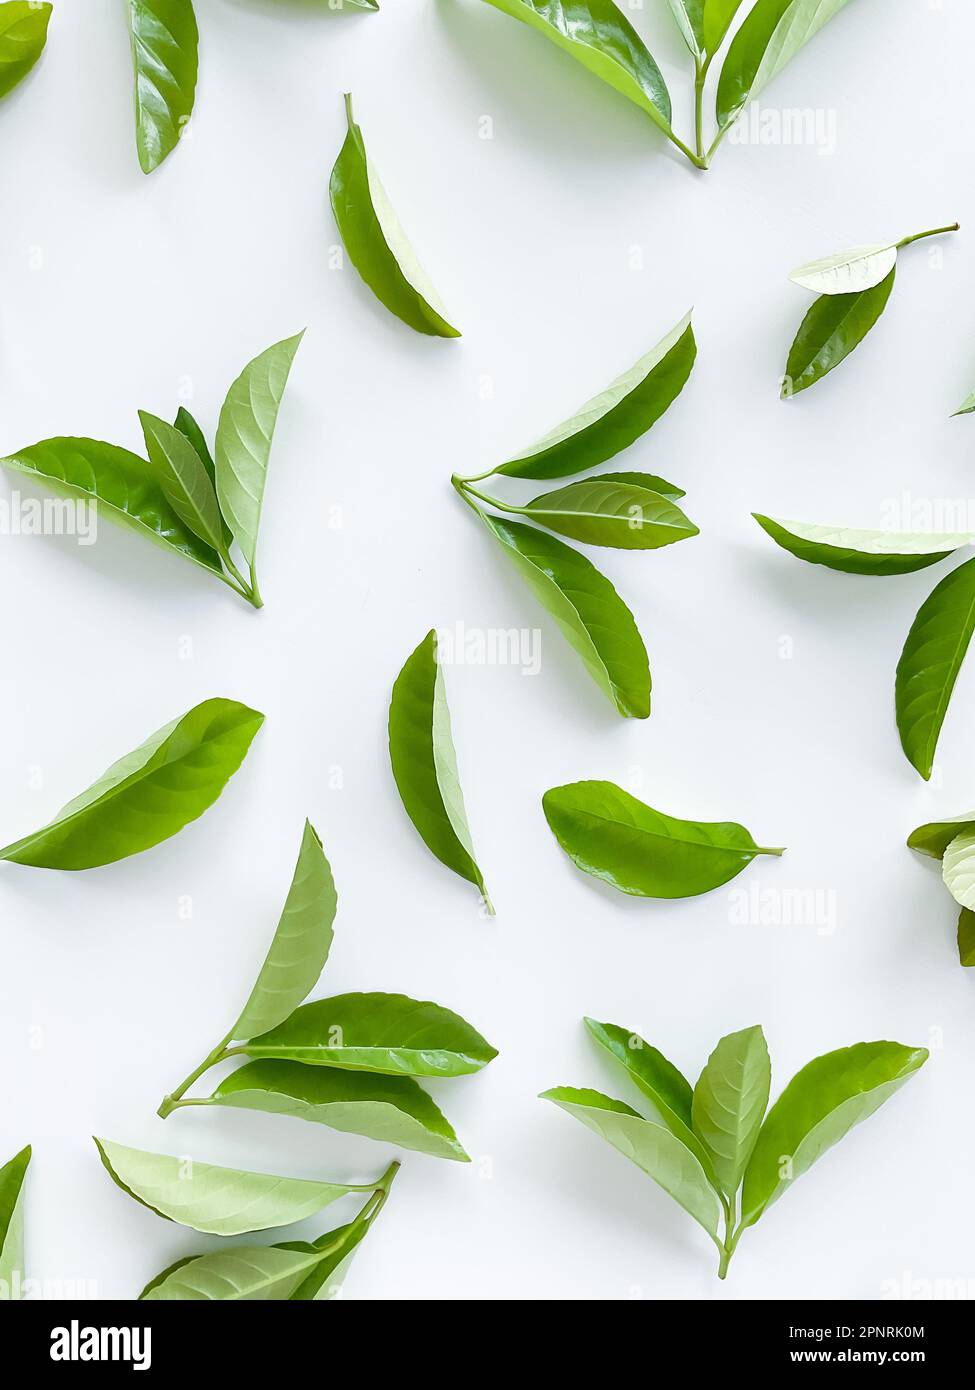 green leaves on a white background. Large fresh decorative leaves. Stock Photo